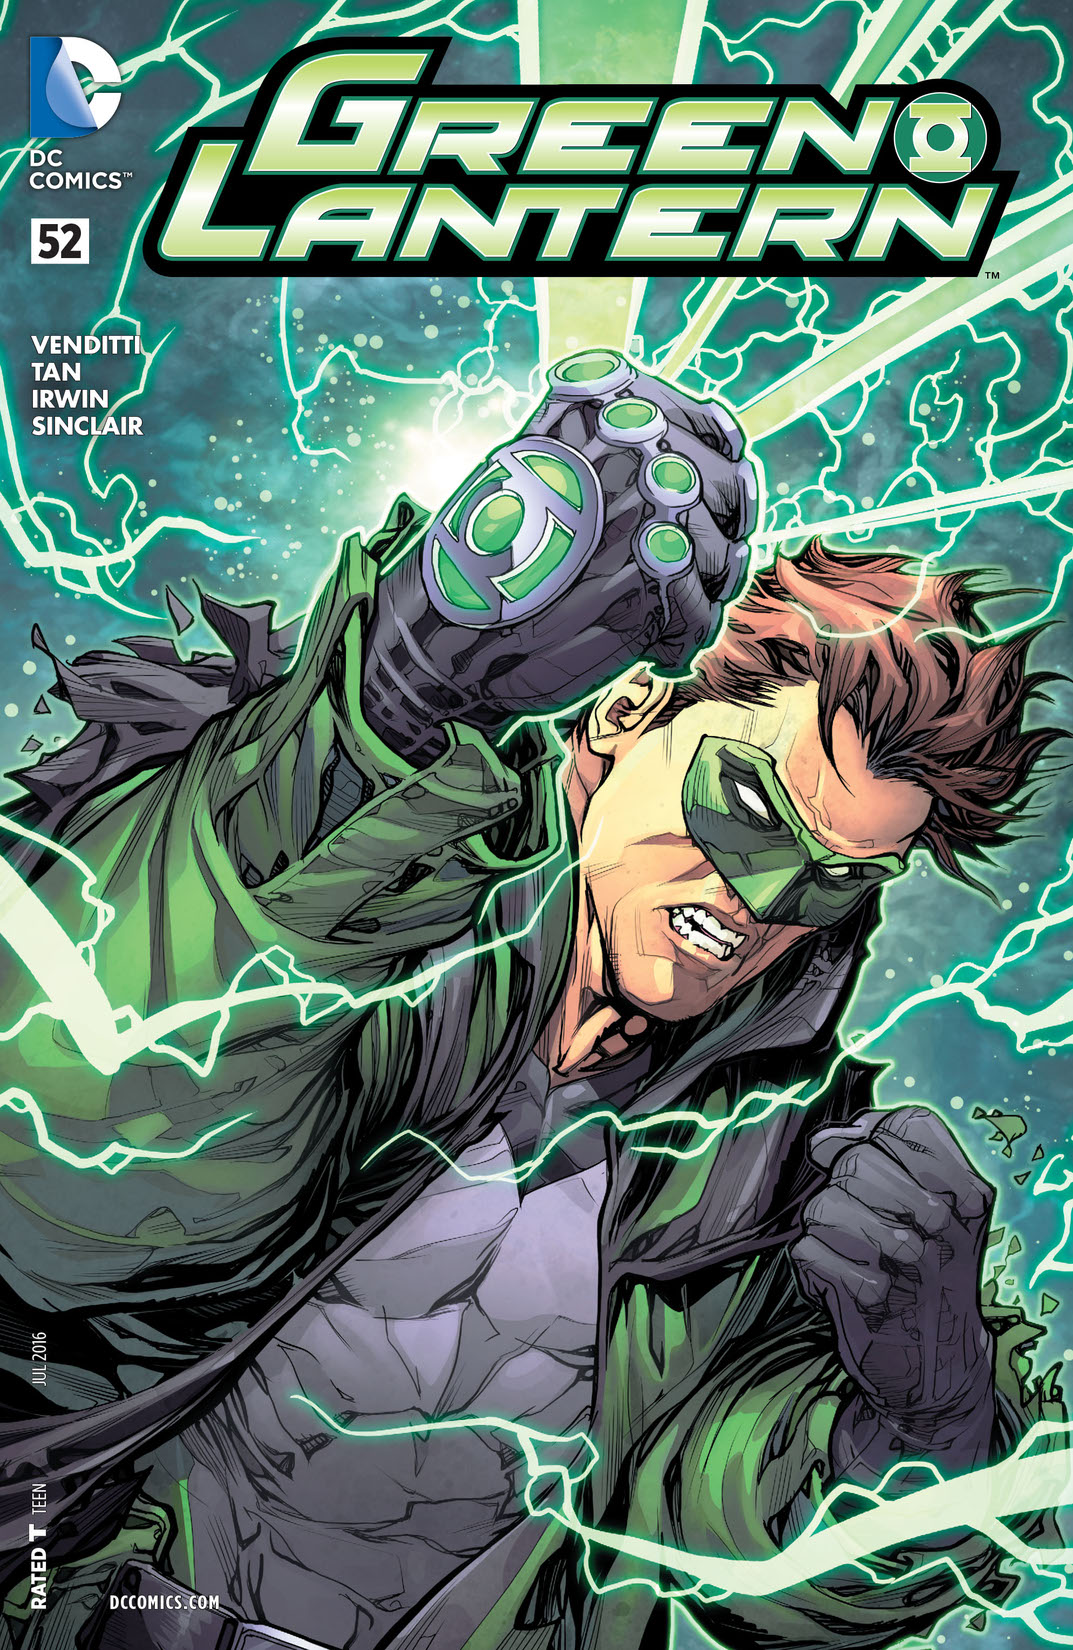 Green Lantern (2011-) #52 preview images